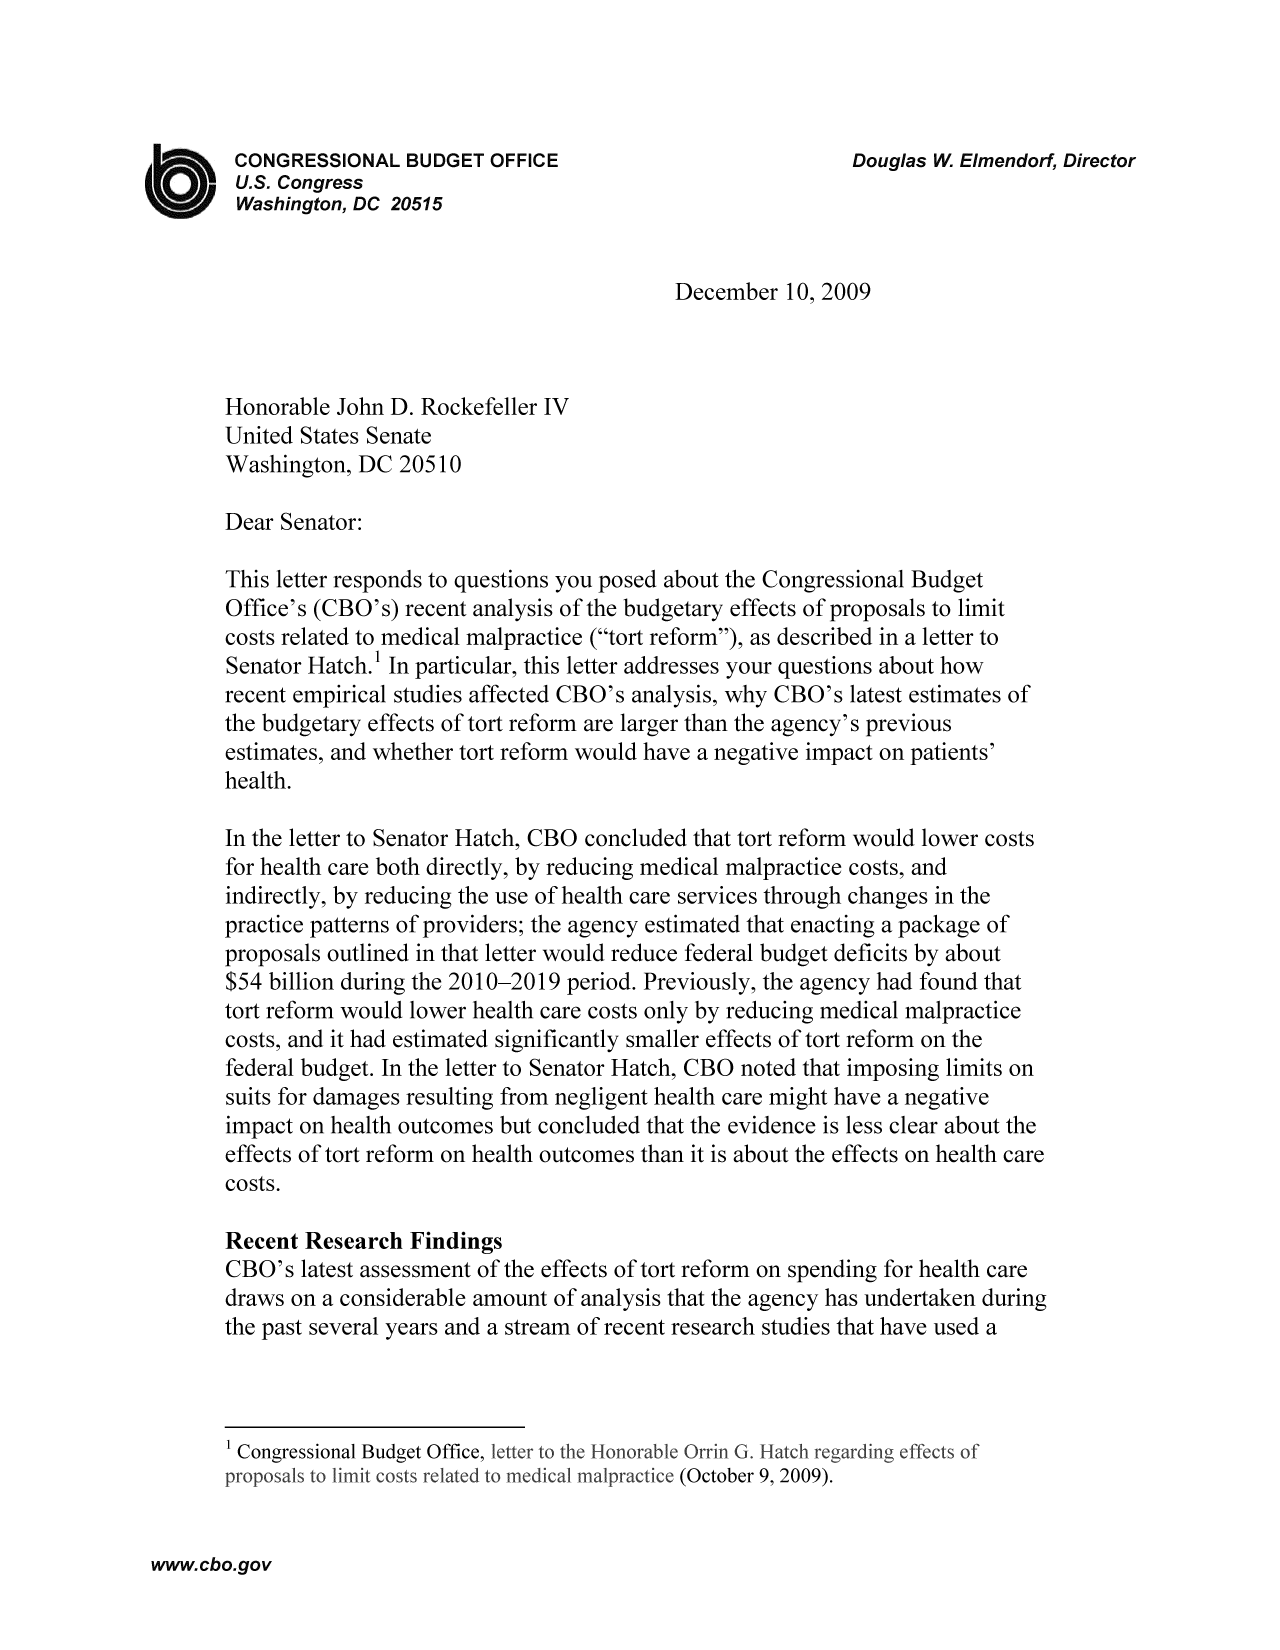 handle is hein.congrec/cbo9351 and id is 1 raw text is: CONGRESSIONAL BUDGET OFFICE                          Douglas W. Elmendorf, Director
U.S. Congress
Washington, DC 20515
December 10, 2009
Honorable John D. Rockefeller IV
United States Senate
Washington, DC 20510
Dear Senator:
This letter responds to questions you posed about the Congressional Budget
Office's (CBO's) recent analysis of the budgetary effects of proposals to limit
costs related to medical malpractice (tort reform), as described in a letter to
Senator Hatch.' In particular, this letter addresses your questions about how
recent empirical studies affected CBO's analysis, why CBO's latest estimates of
the budgetary effects of tort reform are larger than the agency's previous
estimates, and whether tort reform would have a negative impact on patients'
health.
In the letter to Senator Hatch, CBO concluded that tort reform would lower costs
for health care both directly, by reducing medical malpractice costs, and
indirectly, by reducing the use of health care services through changes in the
practice patterns of providers; the agency estimated that enacting a package of
proposals outlined in that letter would reduce federal budget deficits by about
$54 billion during the 2010-2019 period. Previously, the agency had found that
tort reform would lower health care costs only by reducing medical malpractice
costs, and it had estimated significantly smaller effects of tort reform on the
federal budget. In the letter to Senator Hatch, CBO noted that imposing limits on
suits for damages resulting from negligent health care might have a negative
impact on health outcomes but concluded that the evidence is less clear about the
effects of tort reform on health outcomes than it is about the effects on health care
costs.
Recent Research Findings
CBO's latest assessment of the effects of tort reform on spending for health care
draws on a considerable amount of analysis that the agency has undertaken during
the past several years and a stream of recent research studies that have used a
1 Congressional Budget Office,letrtthHooalOriG.achegdngfetsf
proosas t liit ost reate tomedcalmalracice(October 9, 2009).

www.cbo.gov


